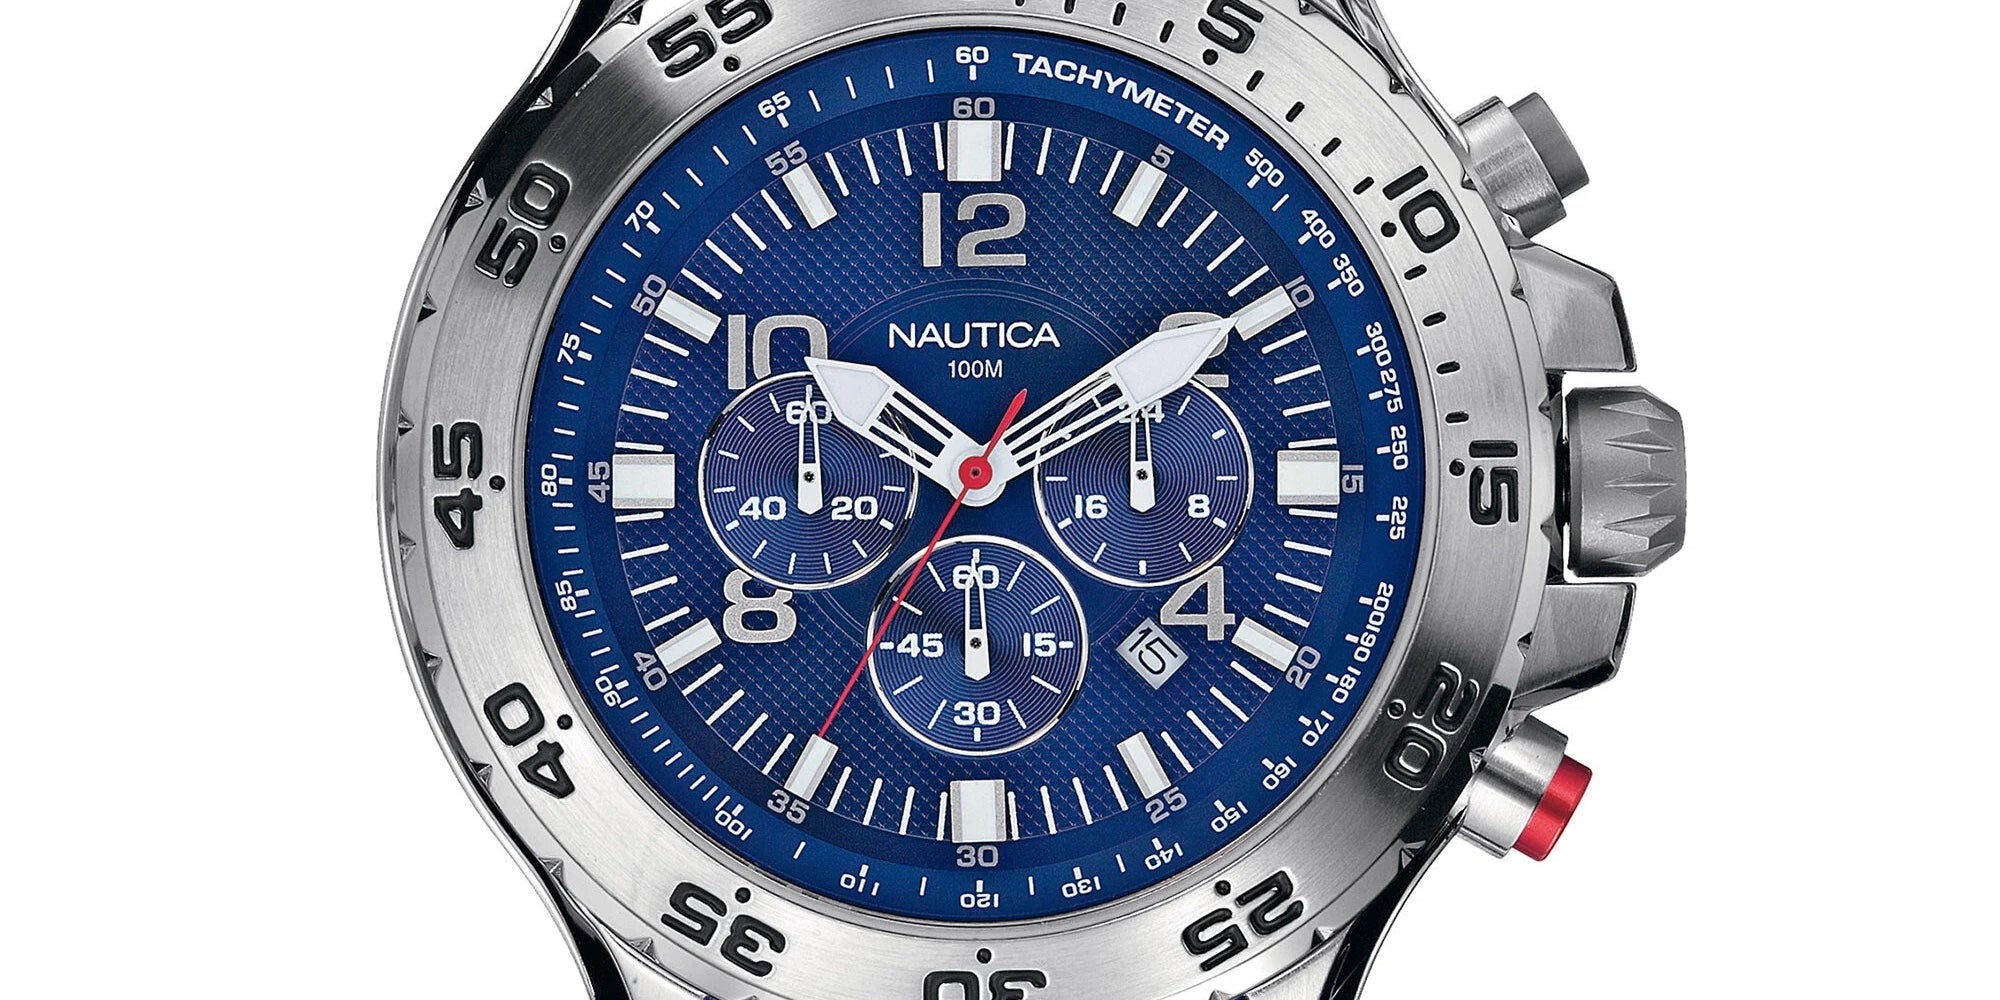 The Nautica Journey Started In 1983